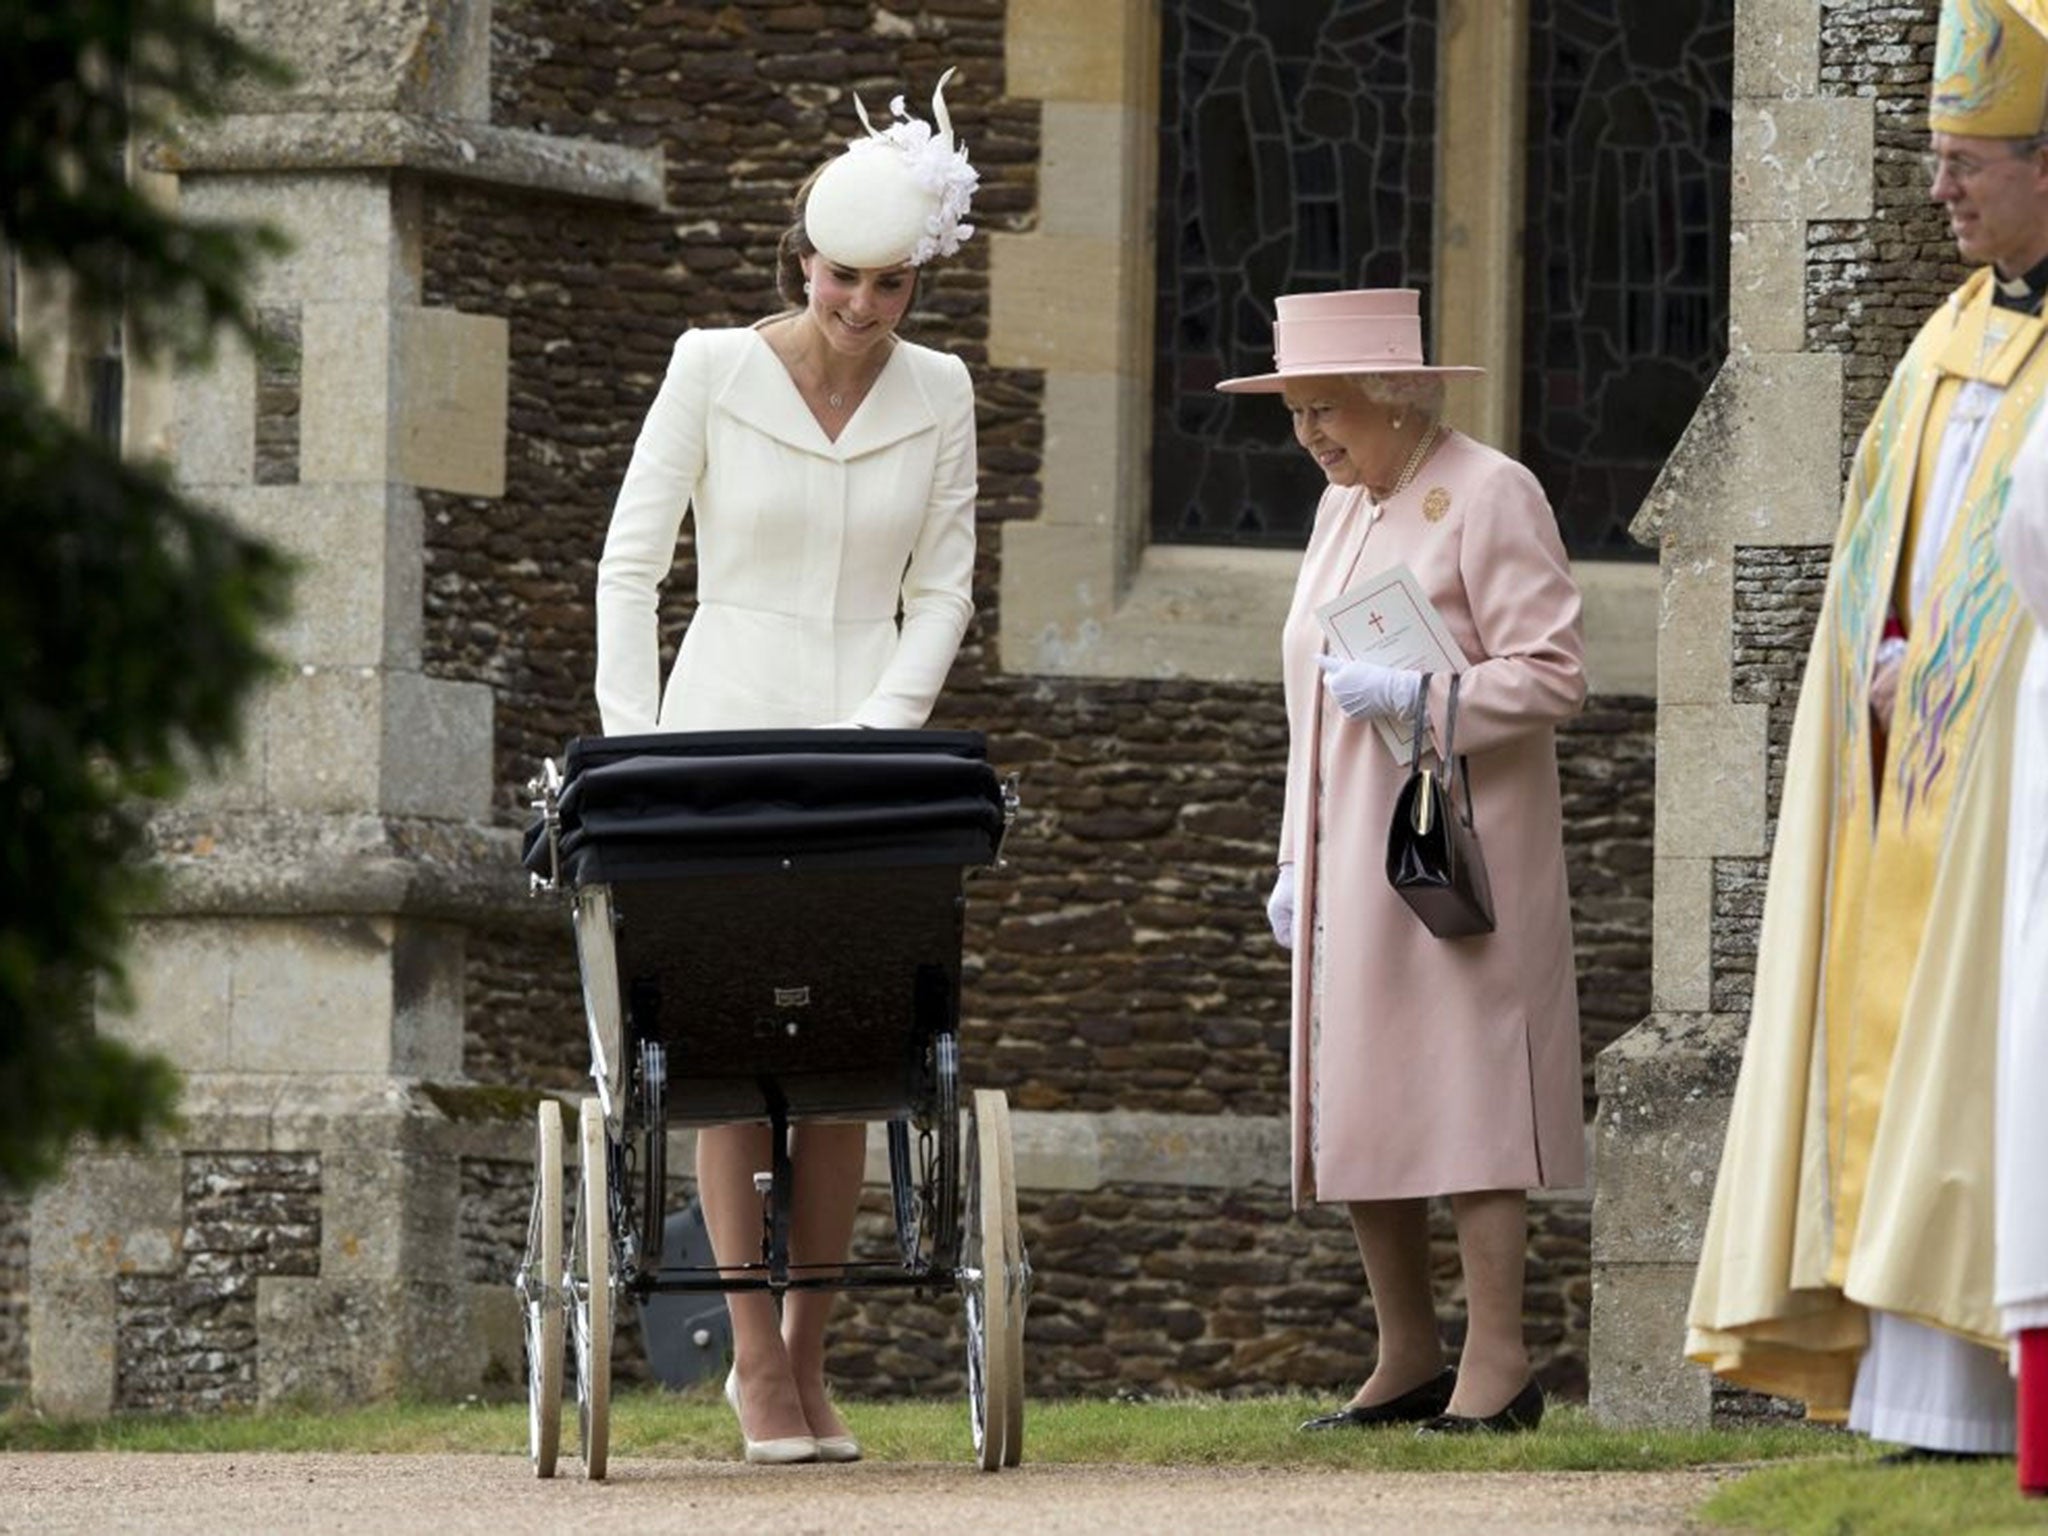 Britain's Queen Elizabeth II stands with Kate the Duchess of Cambridge whilst pushing Princess Charlotte in a pram as they leave after attending the Christening of Britain's Princess Charlotte at St. Mary Magdalene Church in Sandringham, 2015